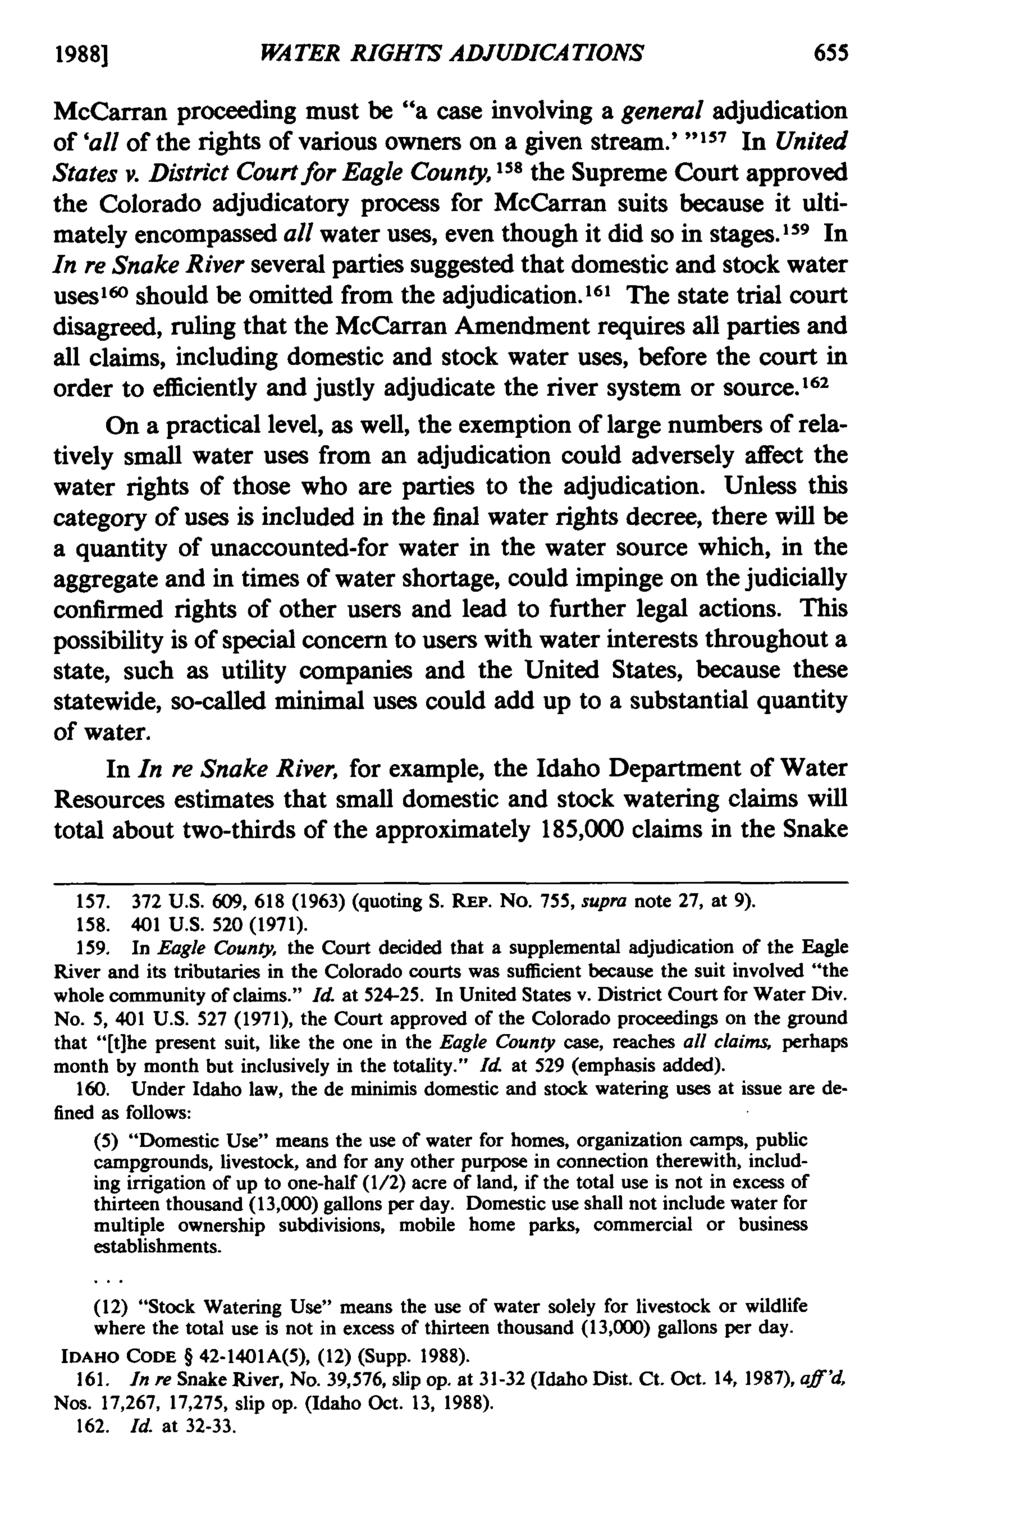 1988] WATER RIGHTS ADJUDICATIONS McCarran proceeding must be "a case involving a general adjudication of 'all of the rights of various owners on a given stream.' "157 In United States v.